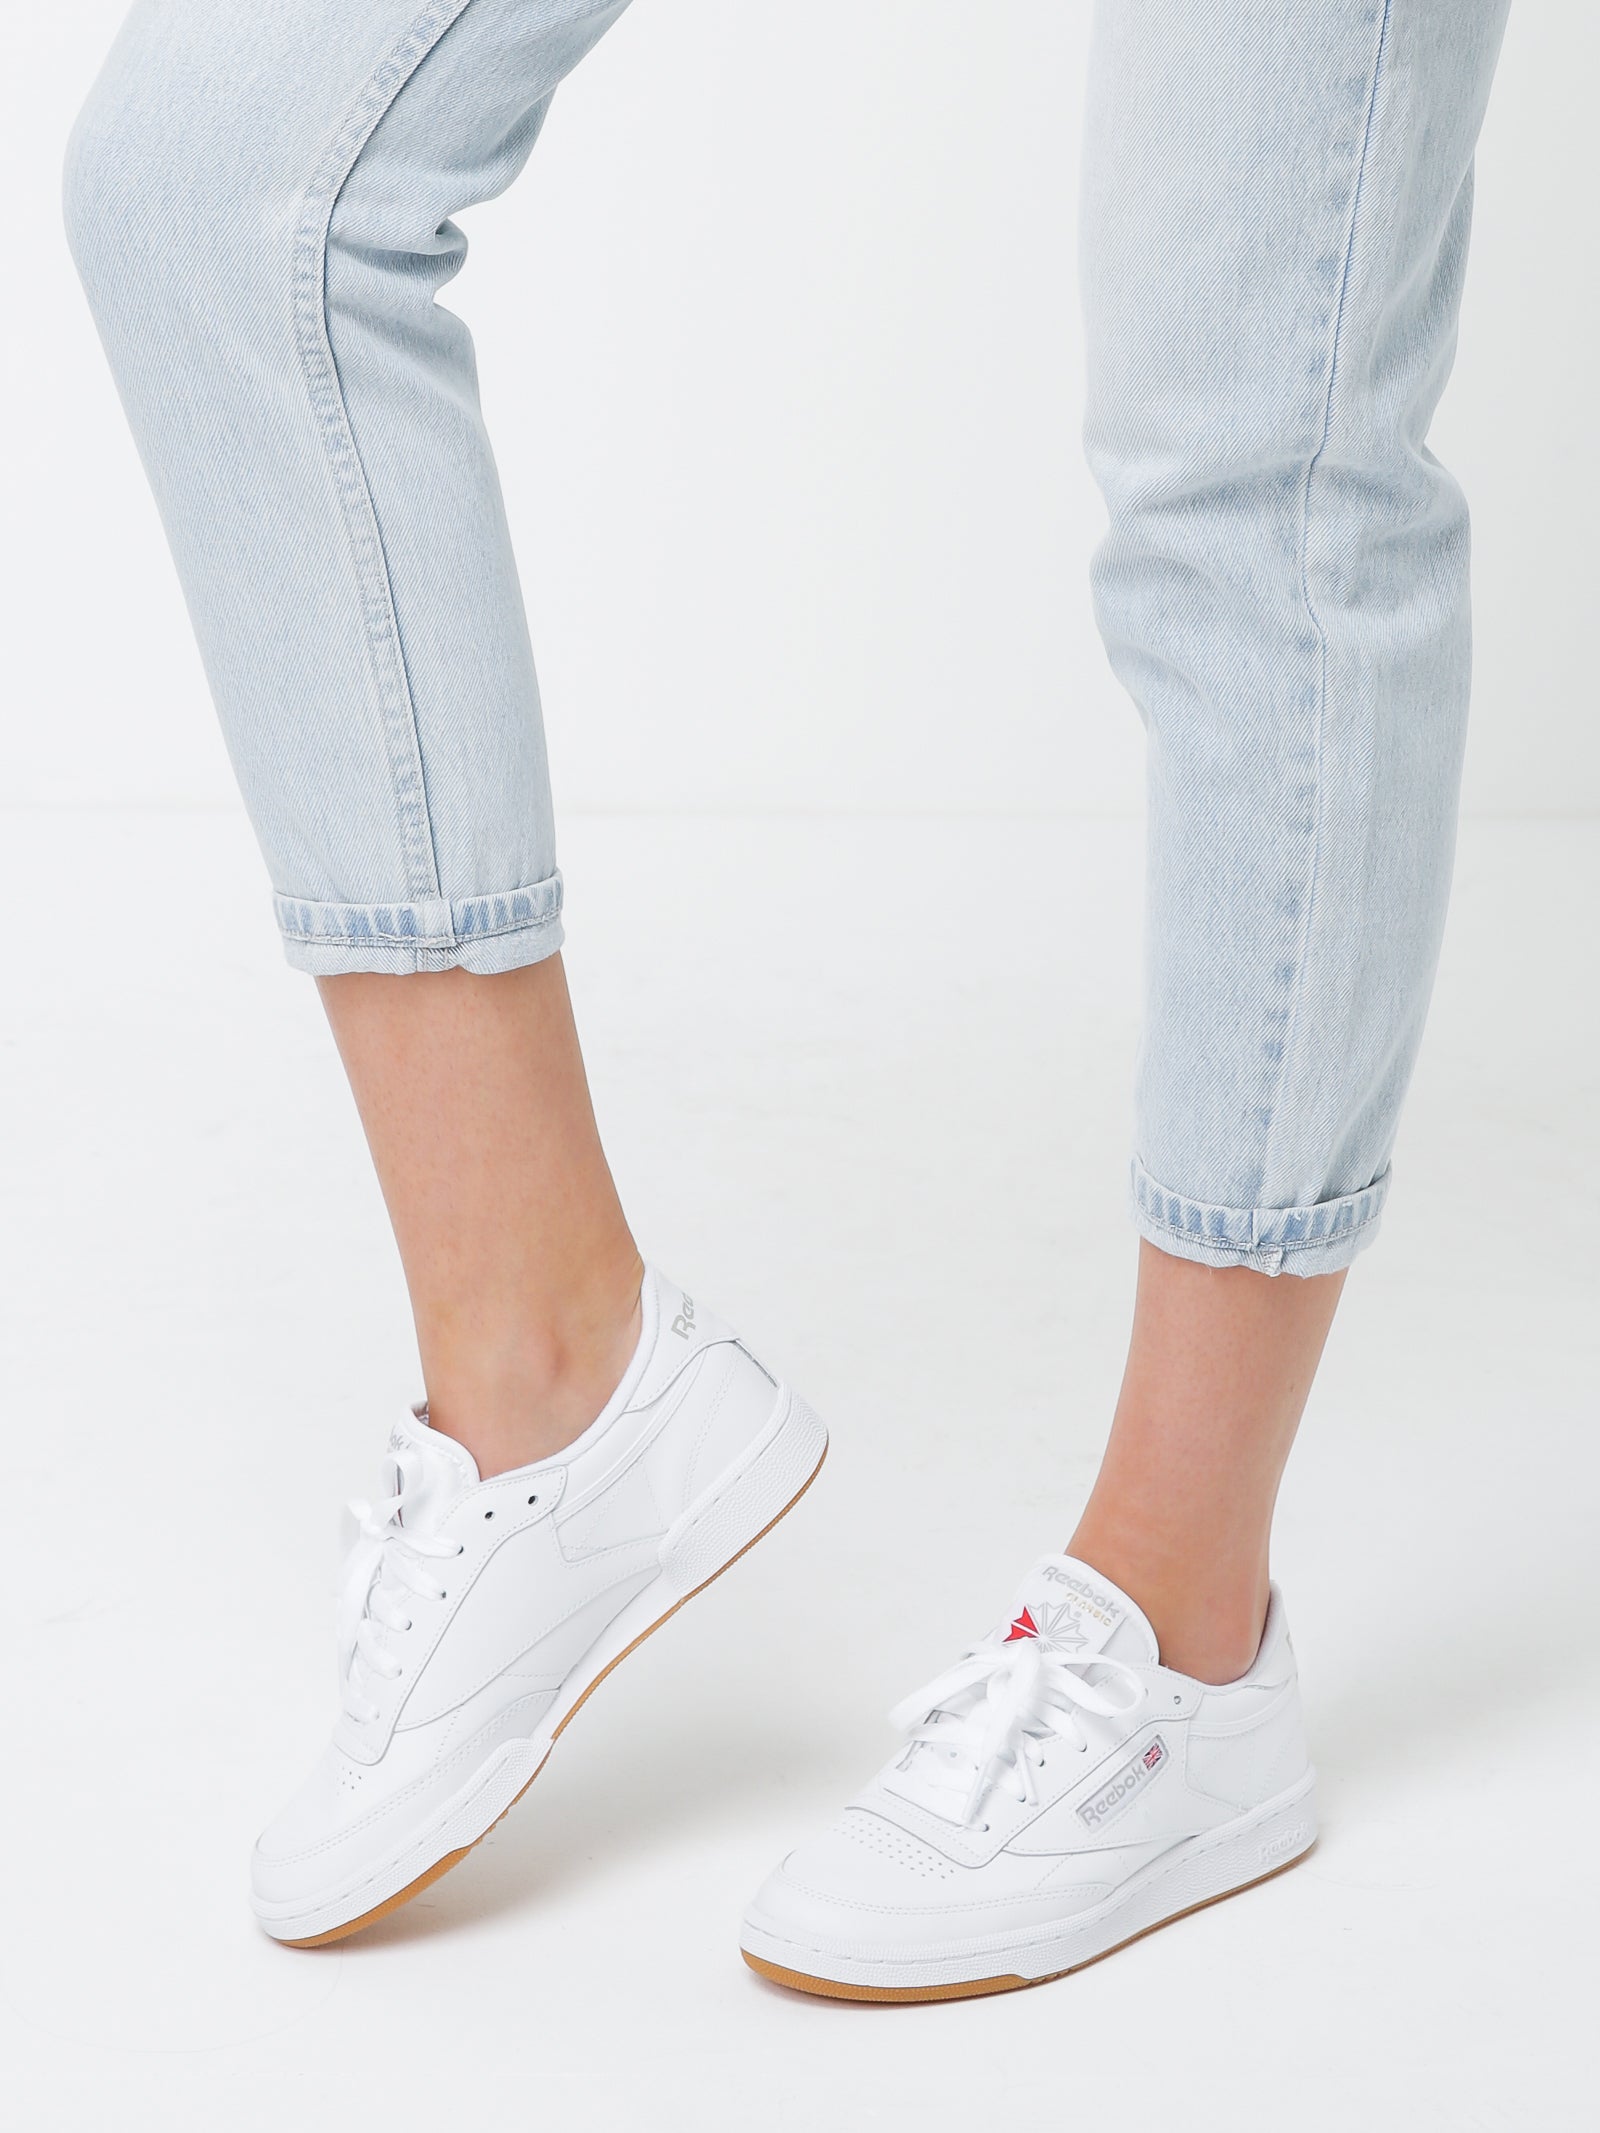 Womens Club C 85 Sneakers in White Leather - Glue Store